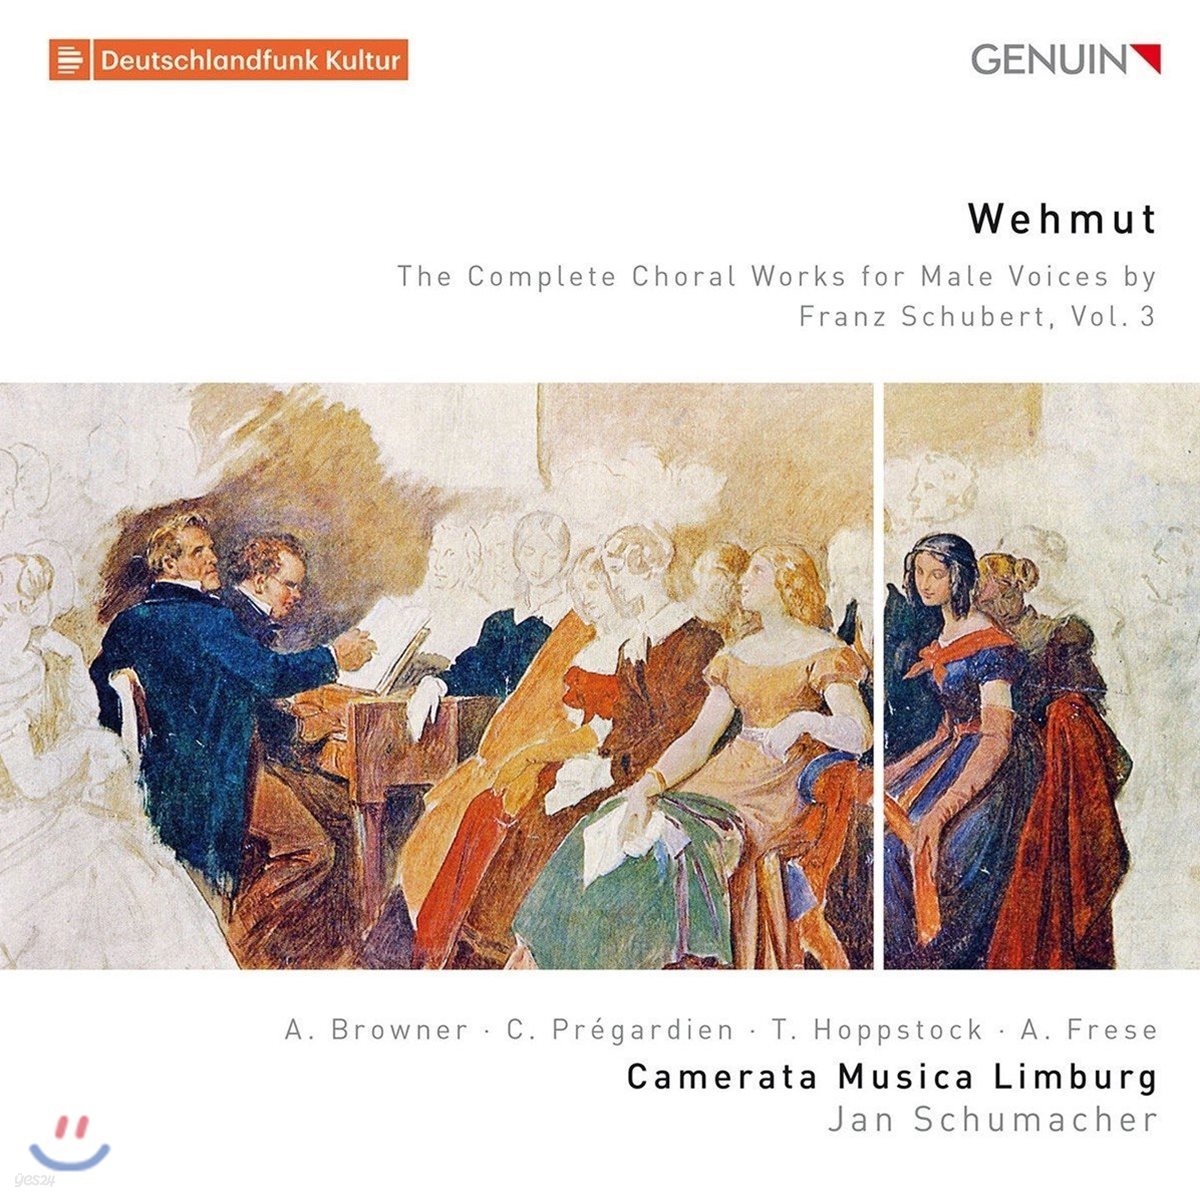 Camerata Musica Limburg 슈베르트: 남성 합창곡 전집 Vol.3 (Schubert: The Complete Choral Works for Male Voices)